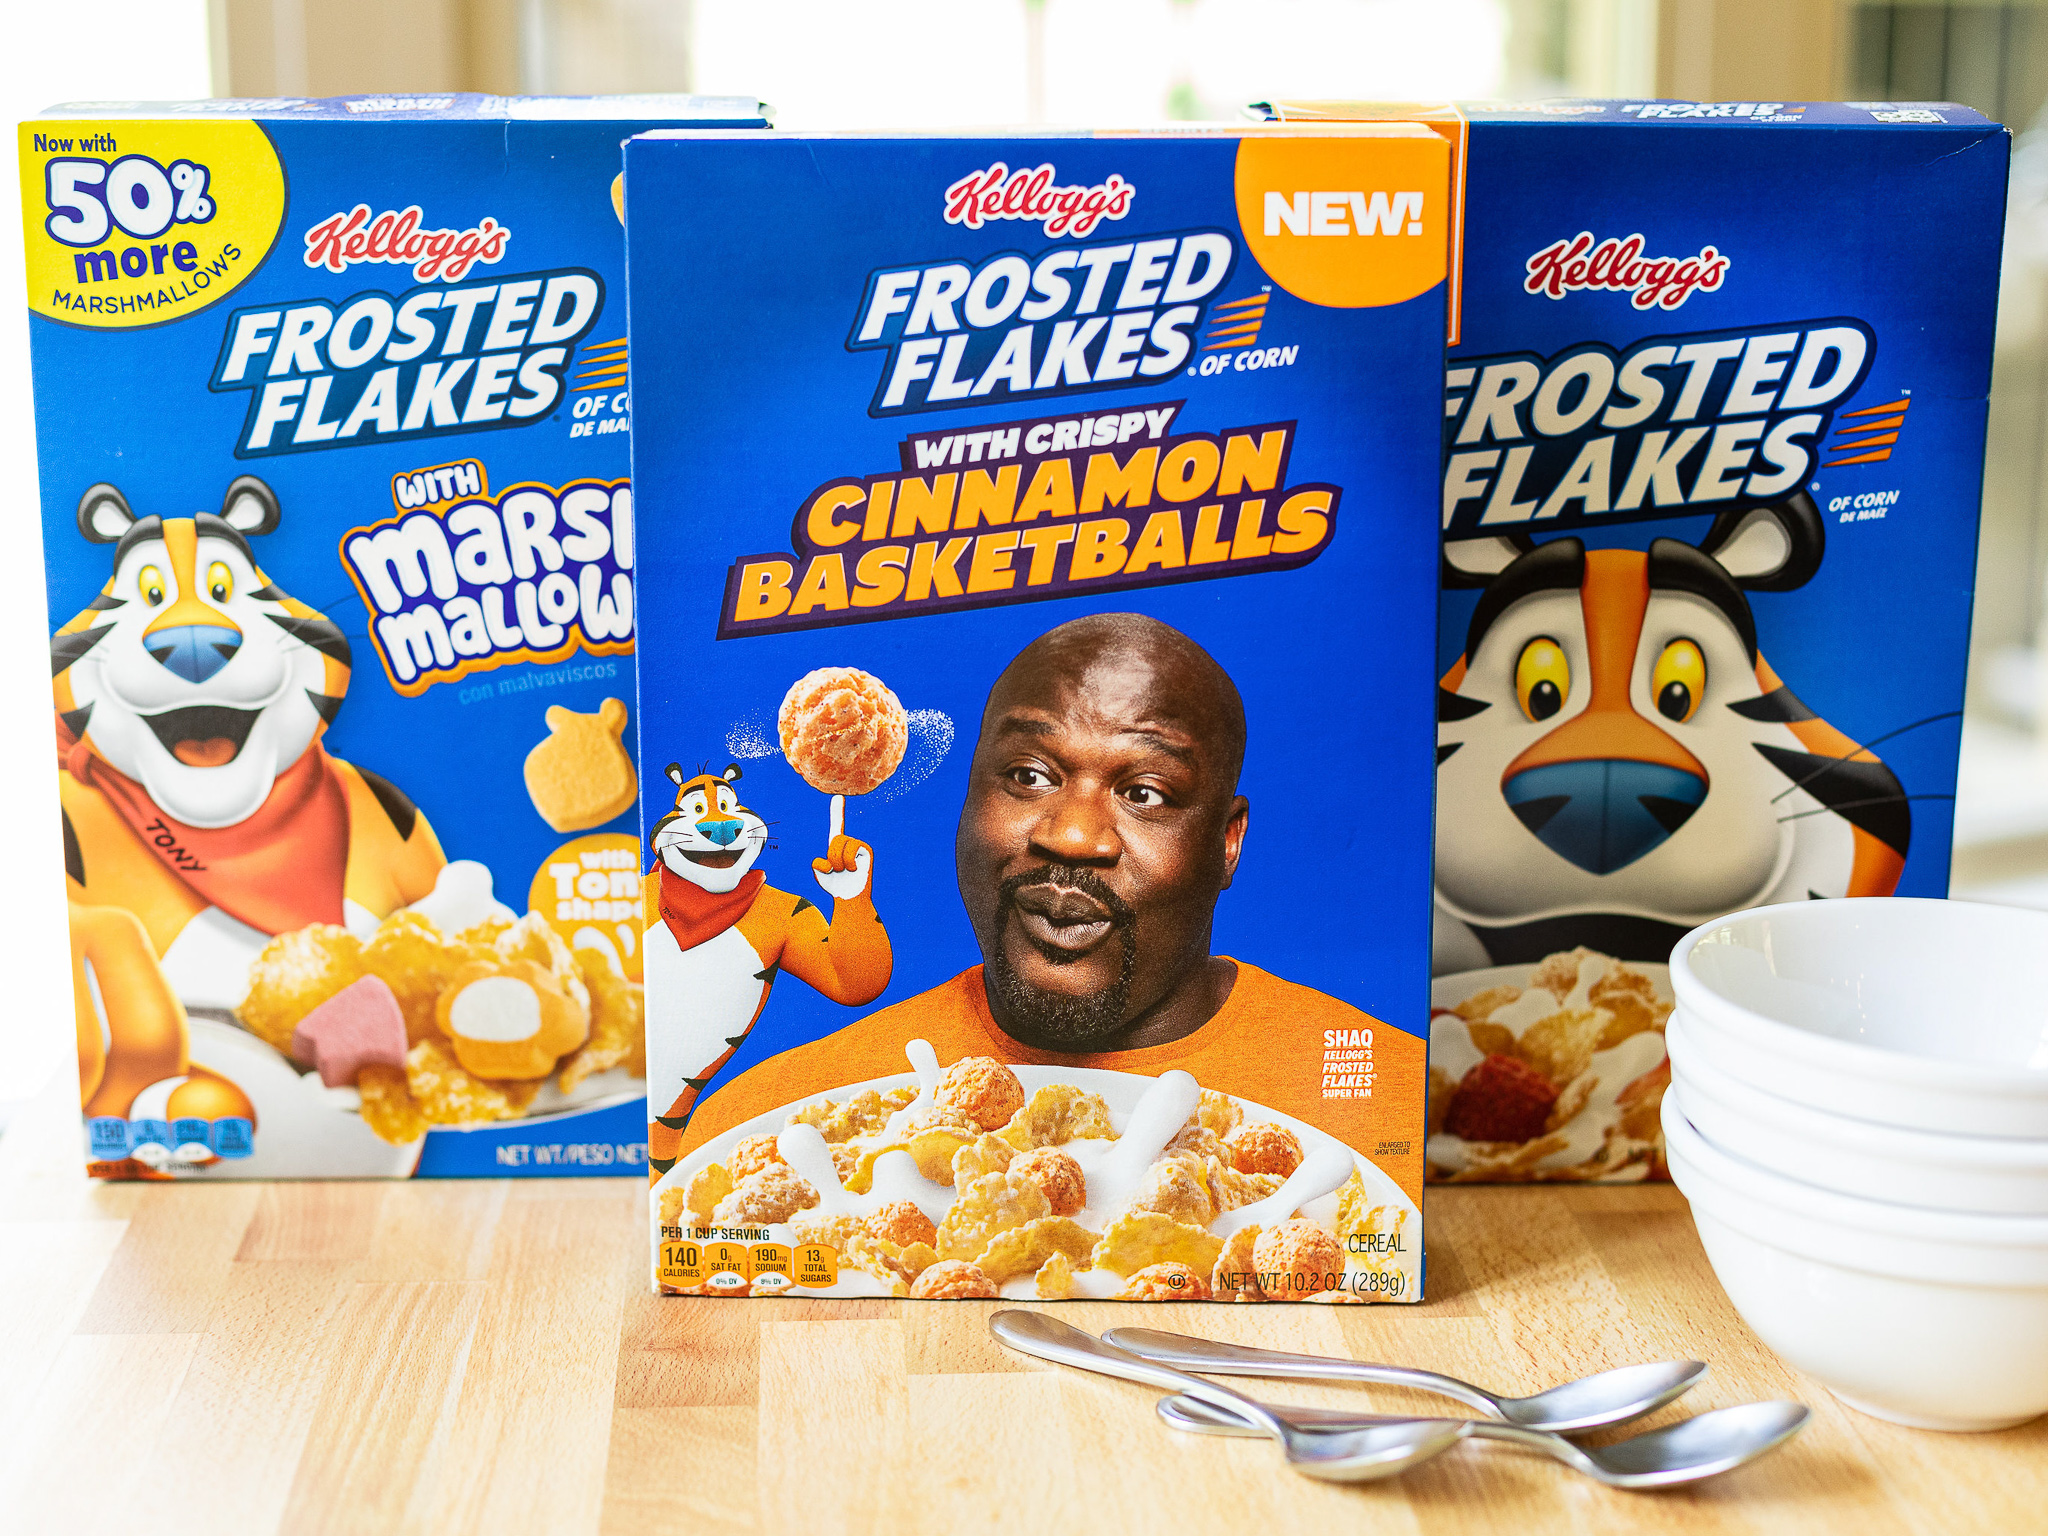 Kellogg's Frosted Flakes Are BOGO At Publix + Each Box Is Worth A $2 Donation To Mission Tiger! on I Heart Publix